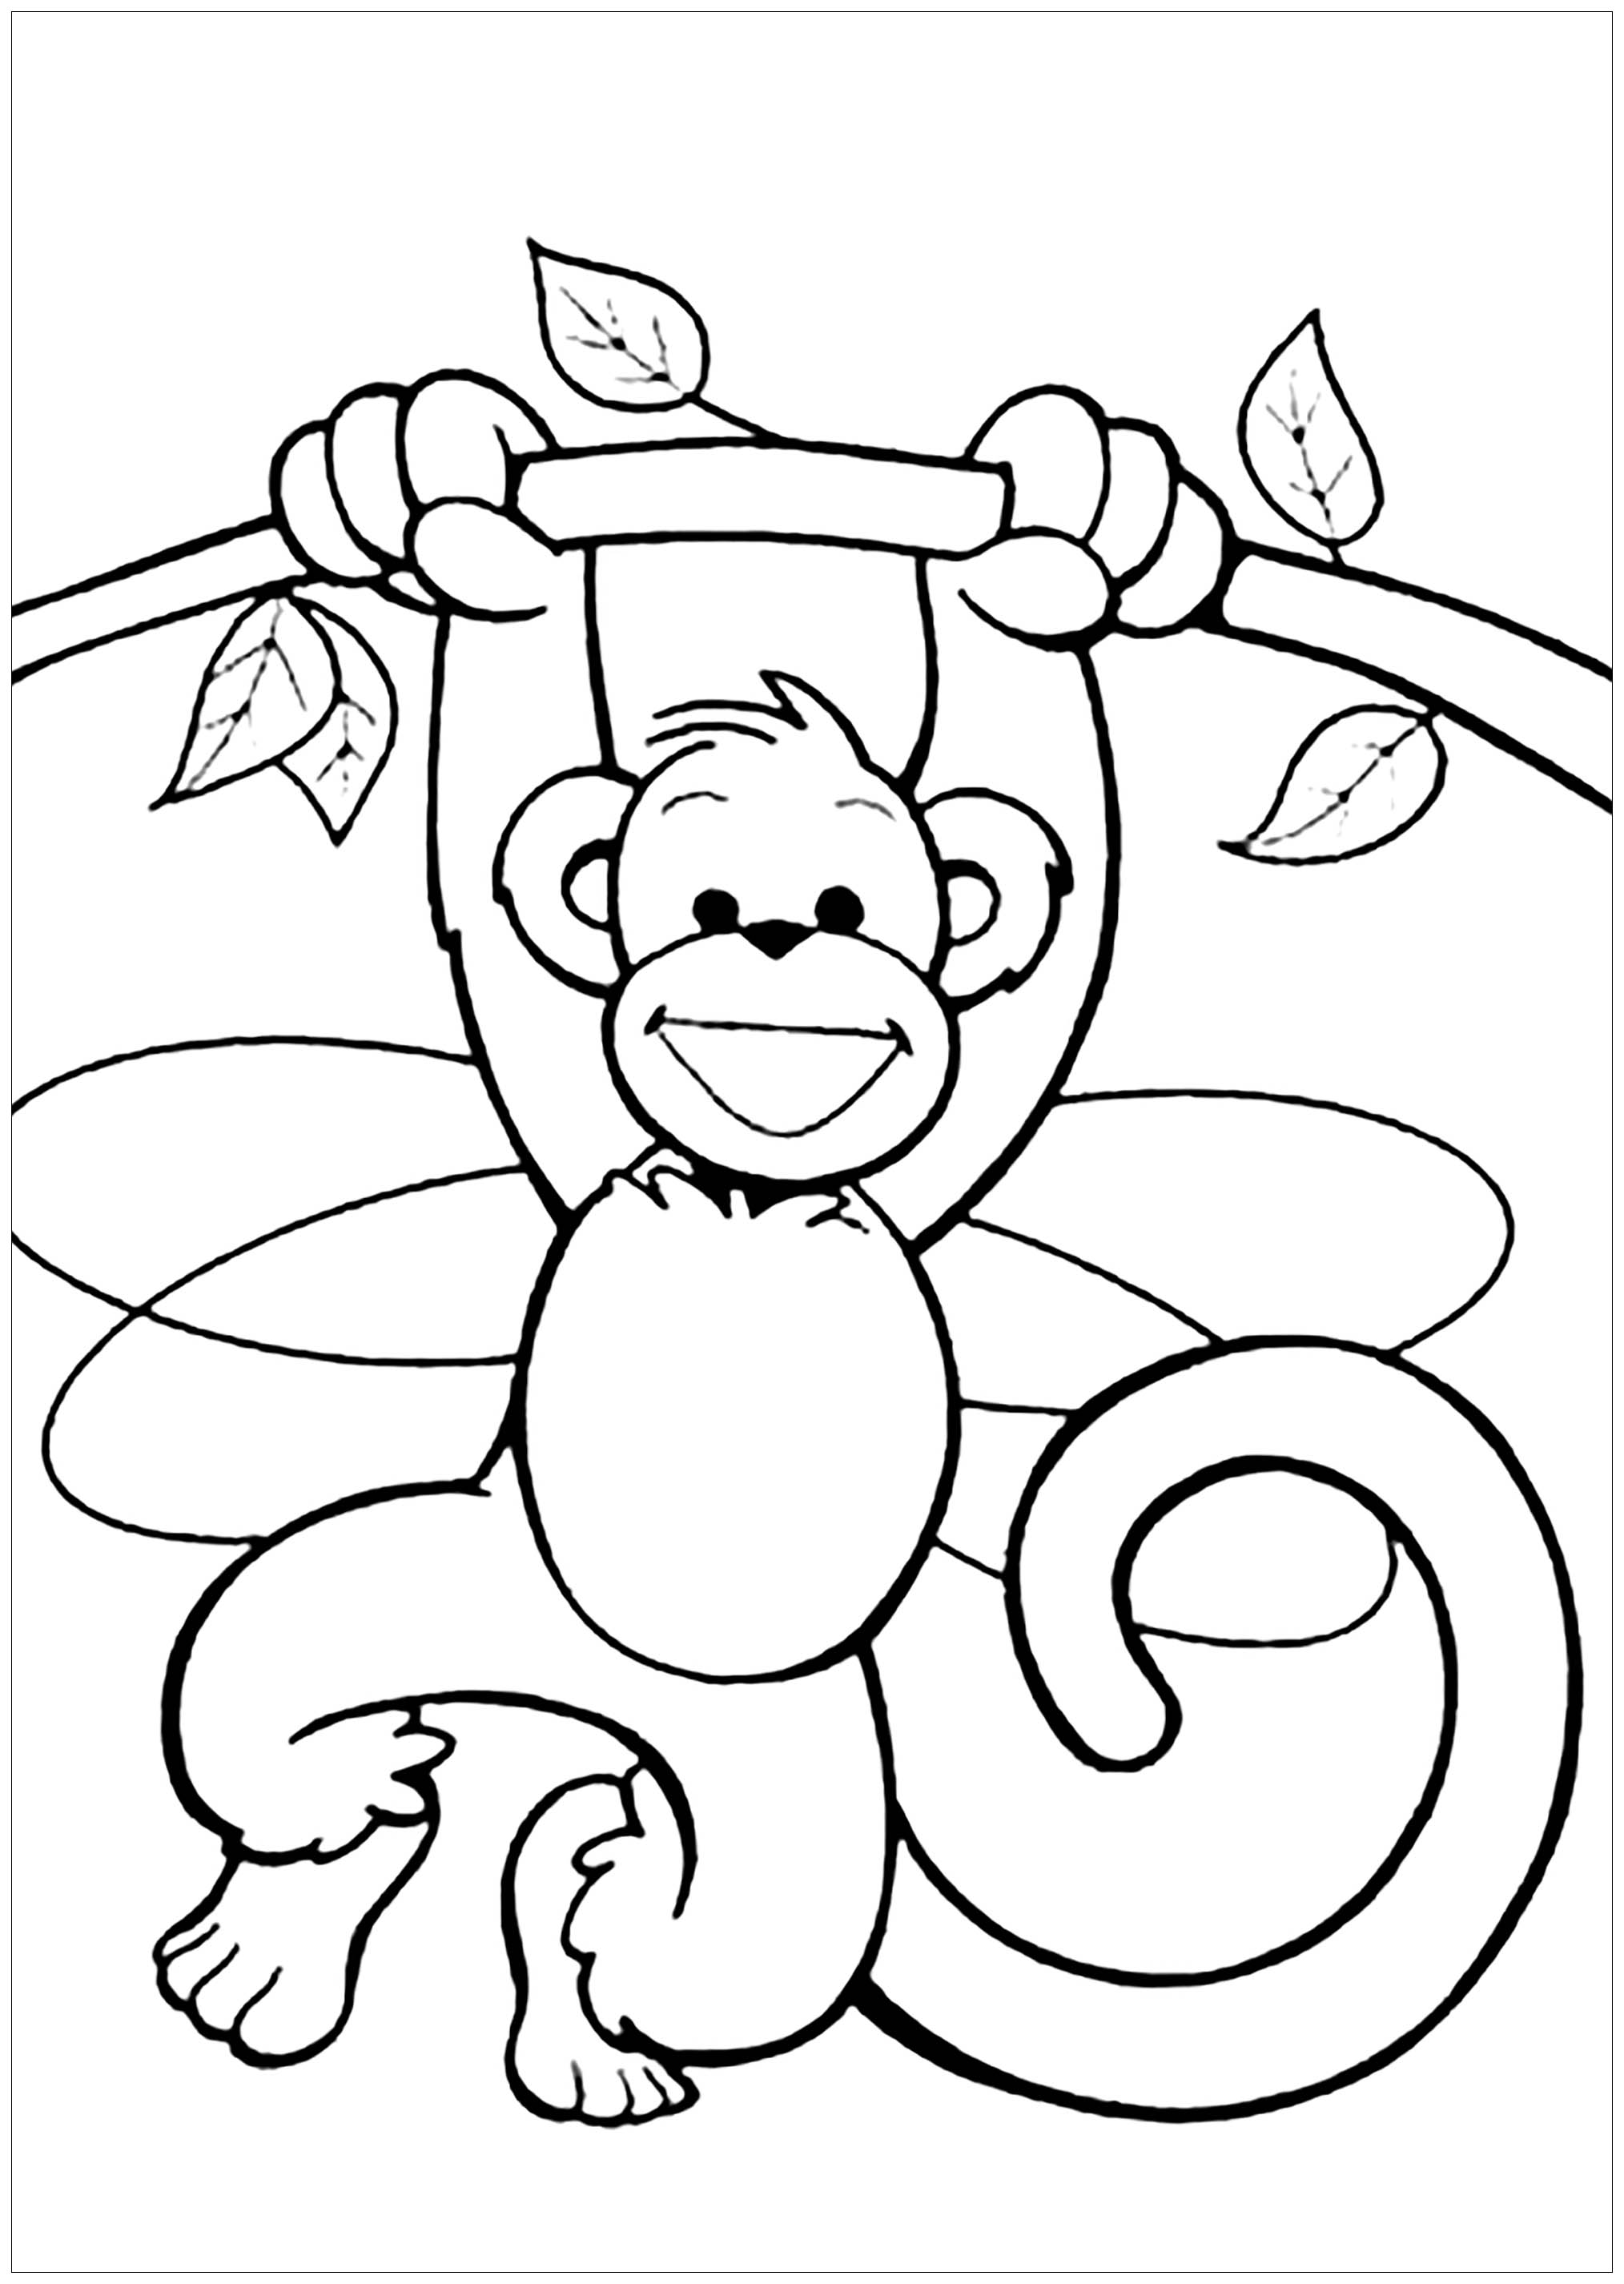 printable-monkey-coloring-pages